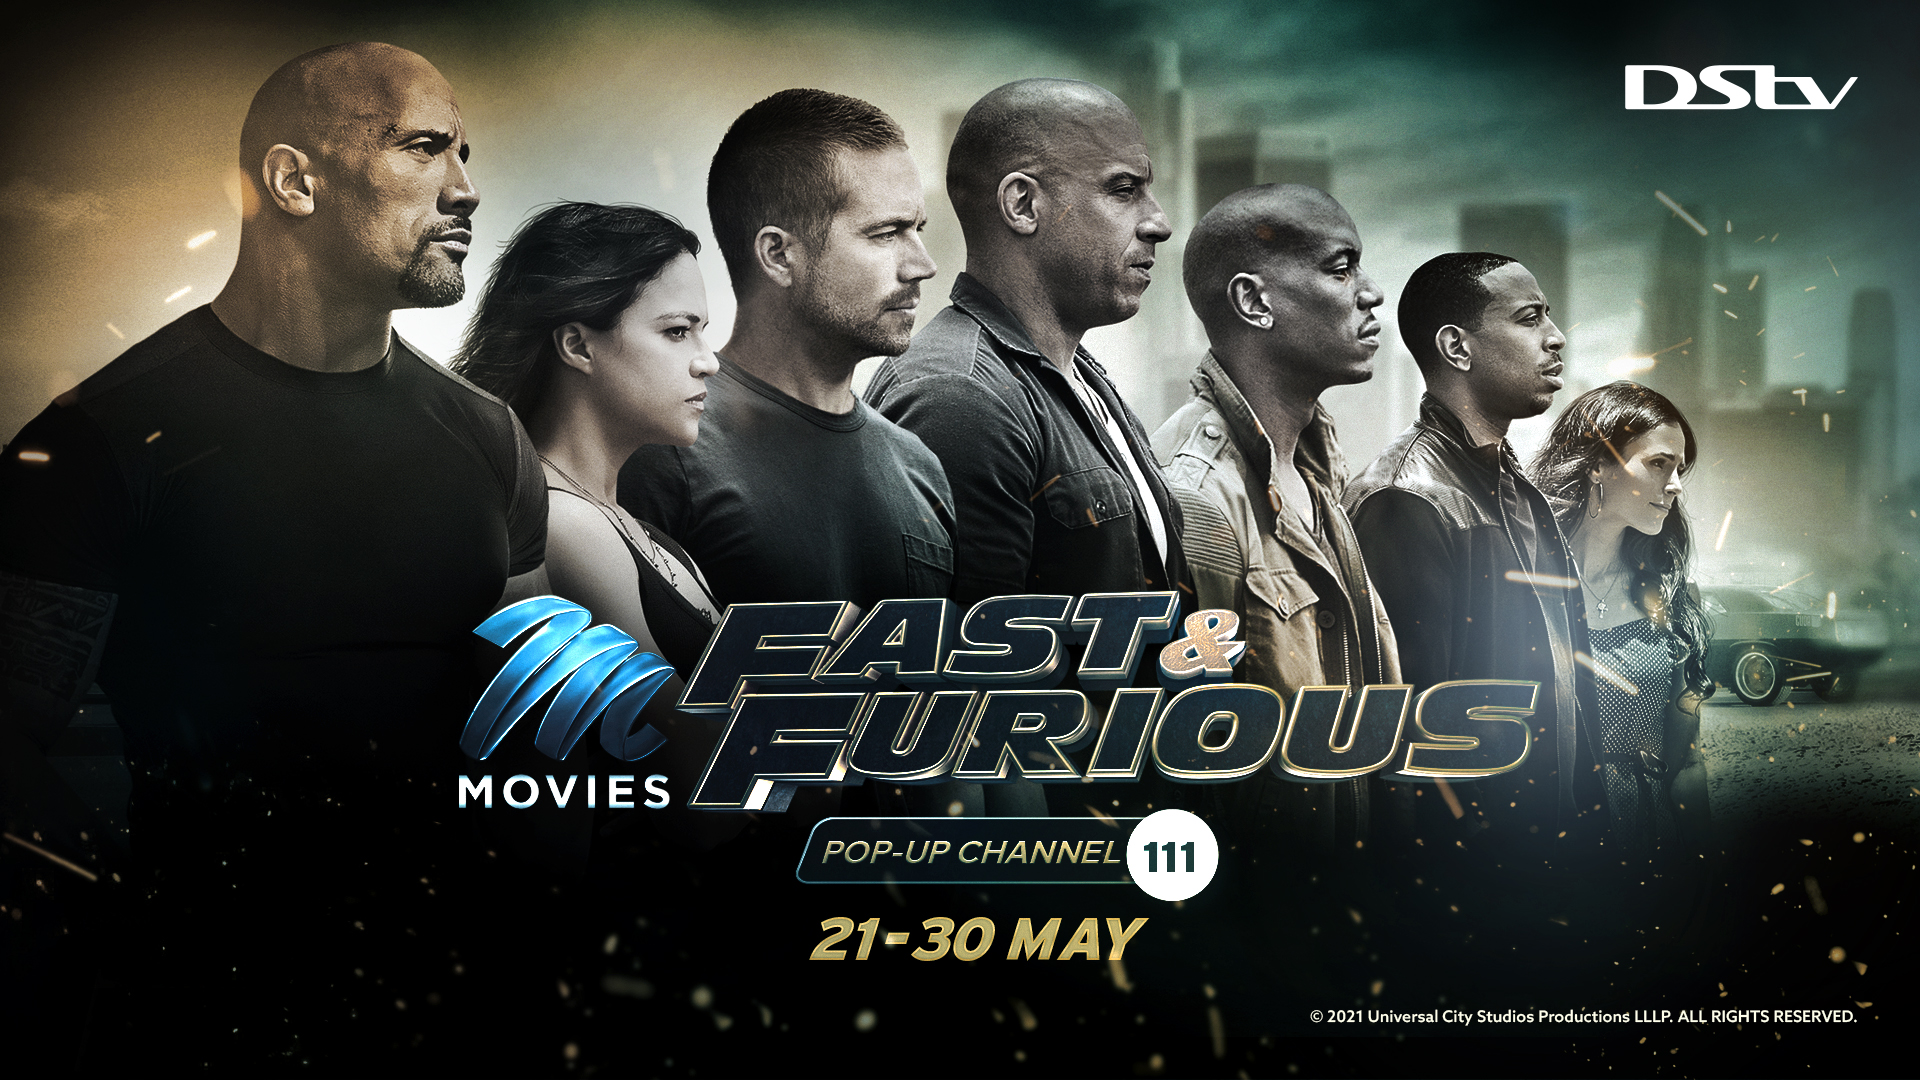 Fast & Furious Pop-Up Channel Drifts Back to DStv by Popular Demand Ahead of the Latest Film Release